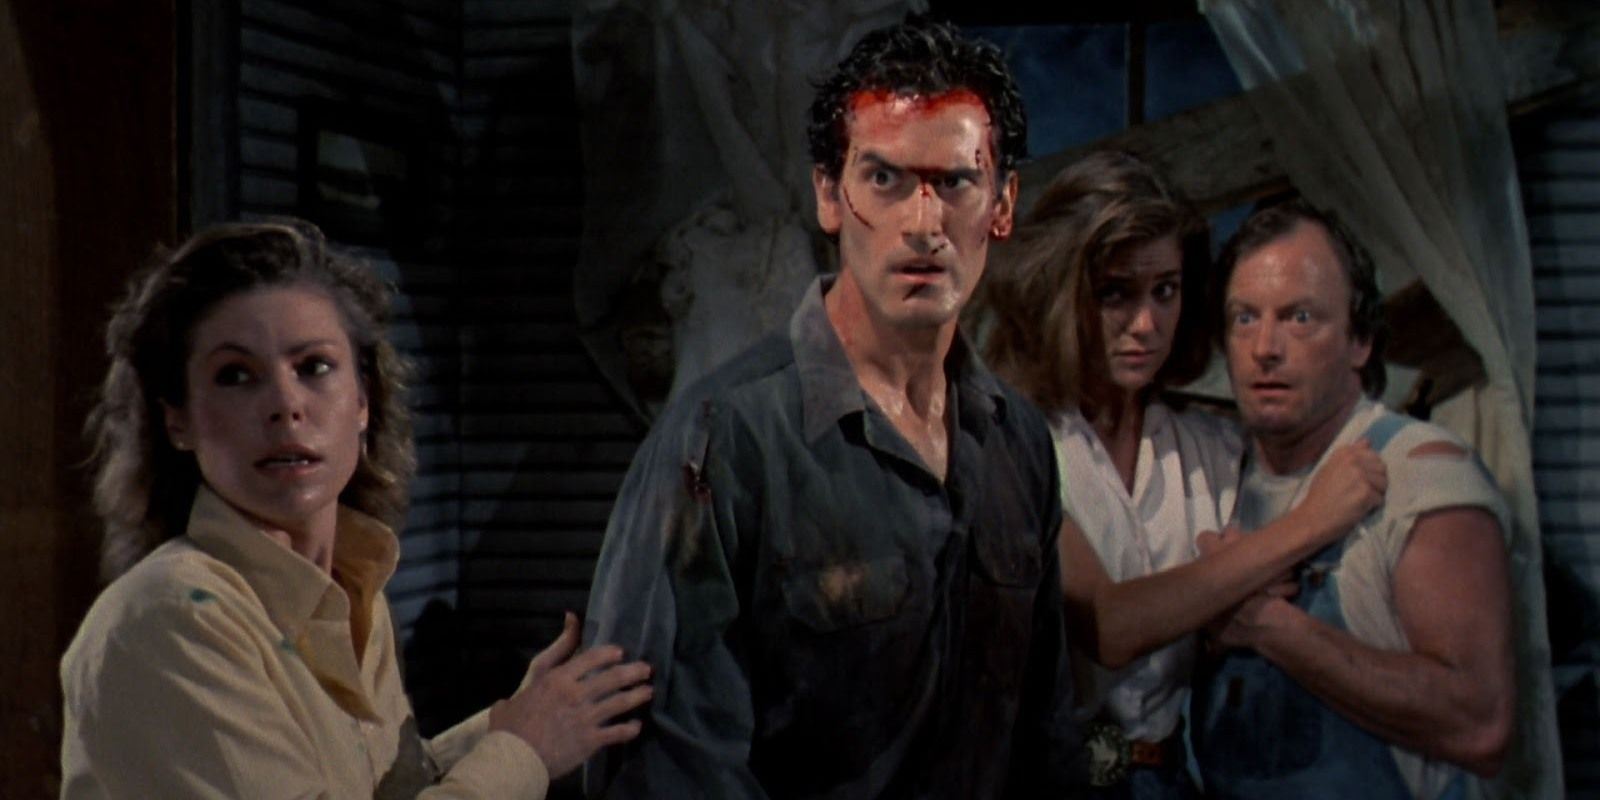 Evil Dead Behind The Scenes Of The 1981 Film Starring Bruce